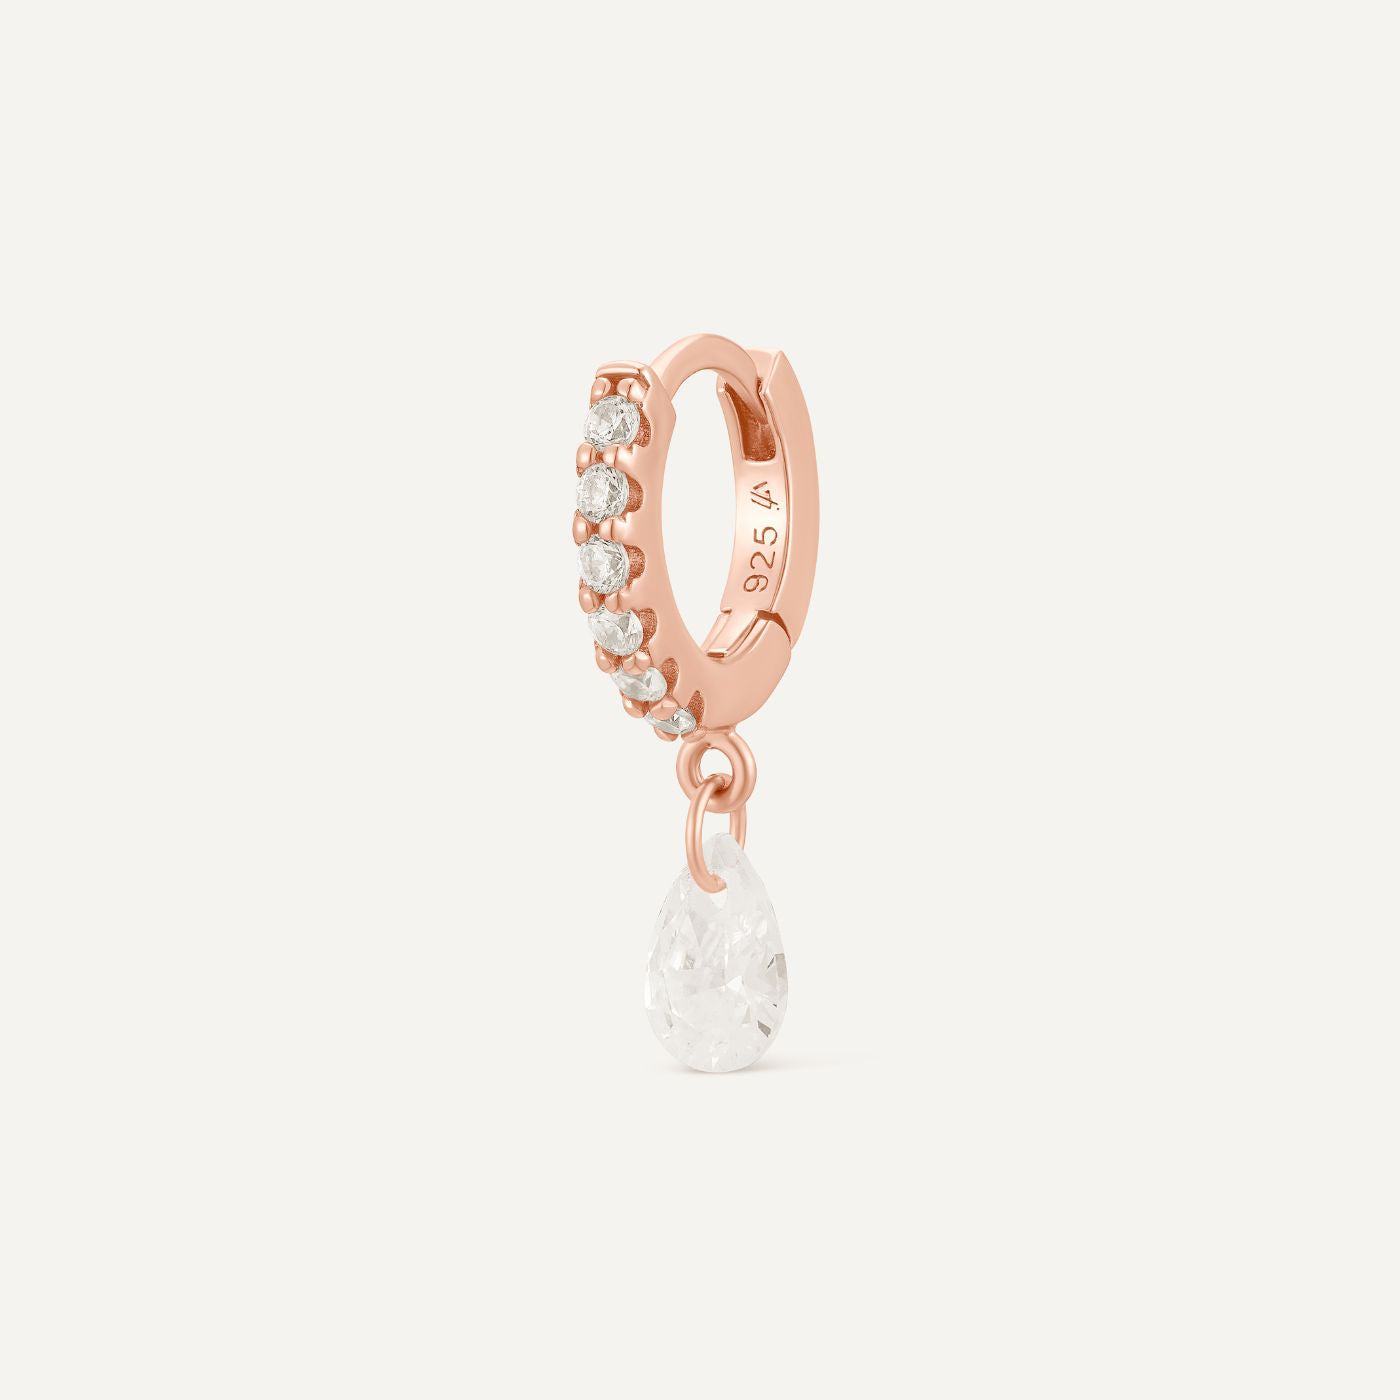 Boucle d'oreille Or rose Arlo